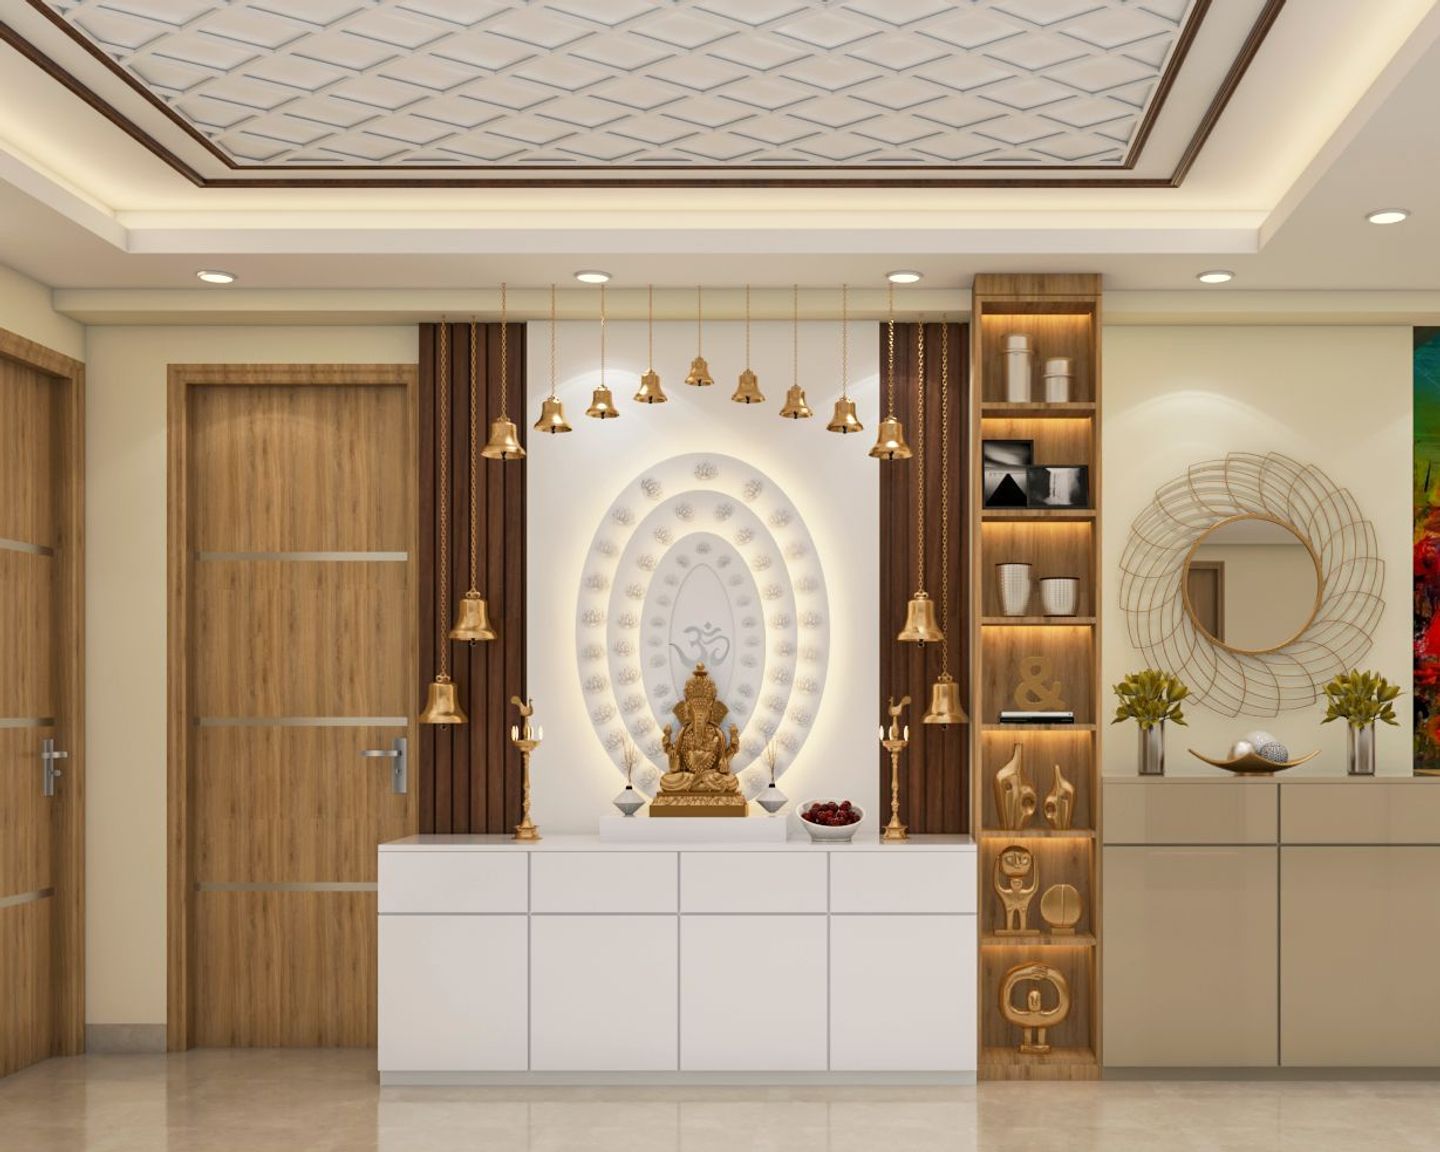 Spacious Pooja Room Design With Lights And Bells - Livspace